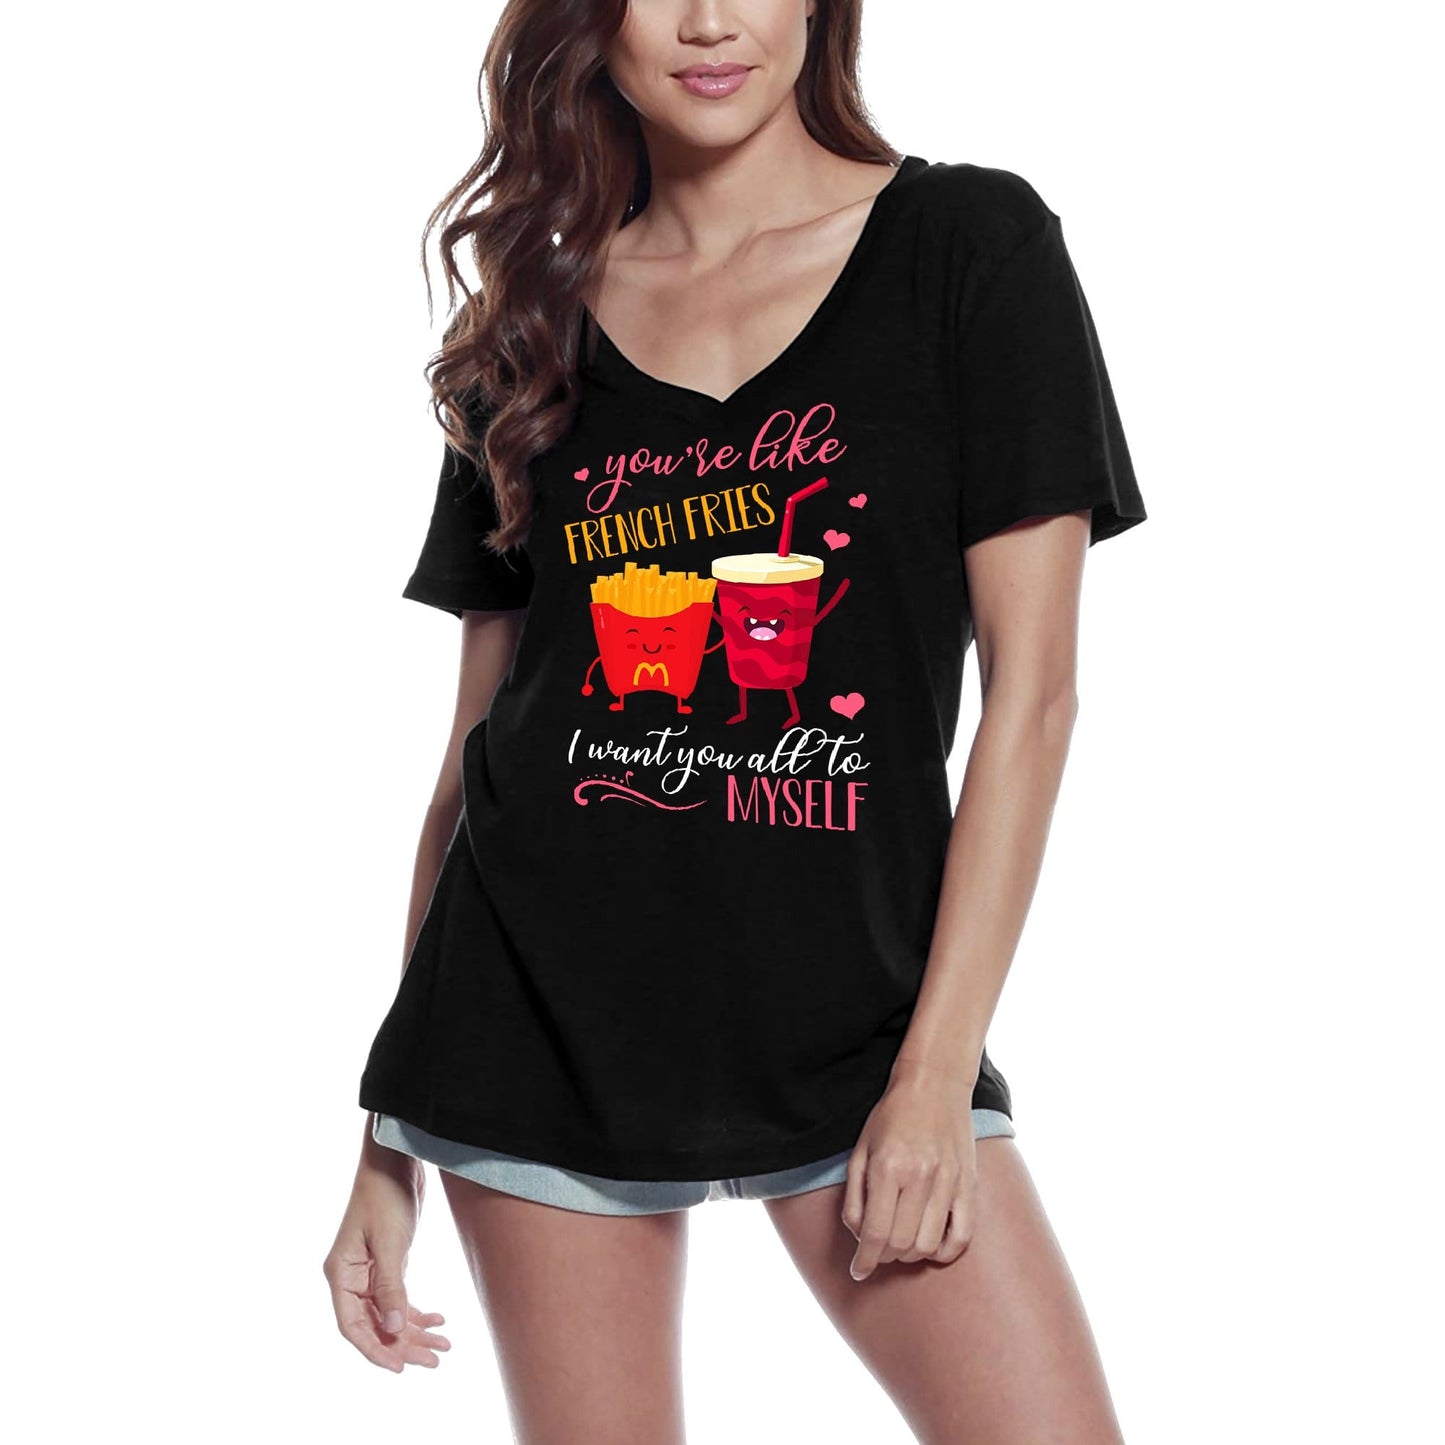 ULTRABASIC Damen-T-Shirt „You are Like French Fries – I Want You All to Myself“ – lustiges Liebes-T-Shirt